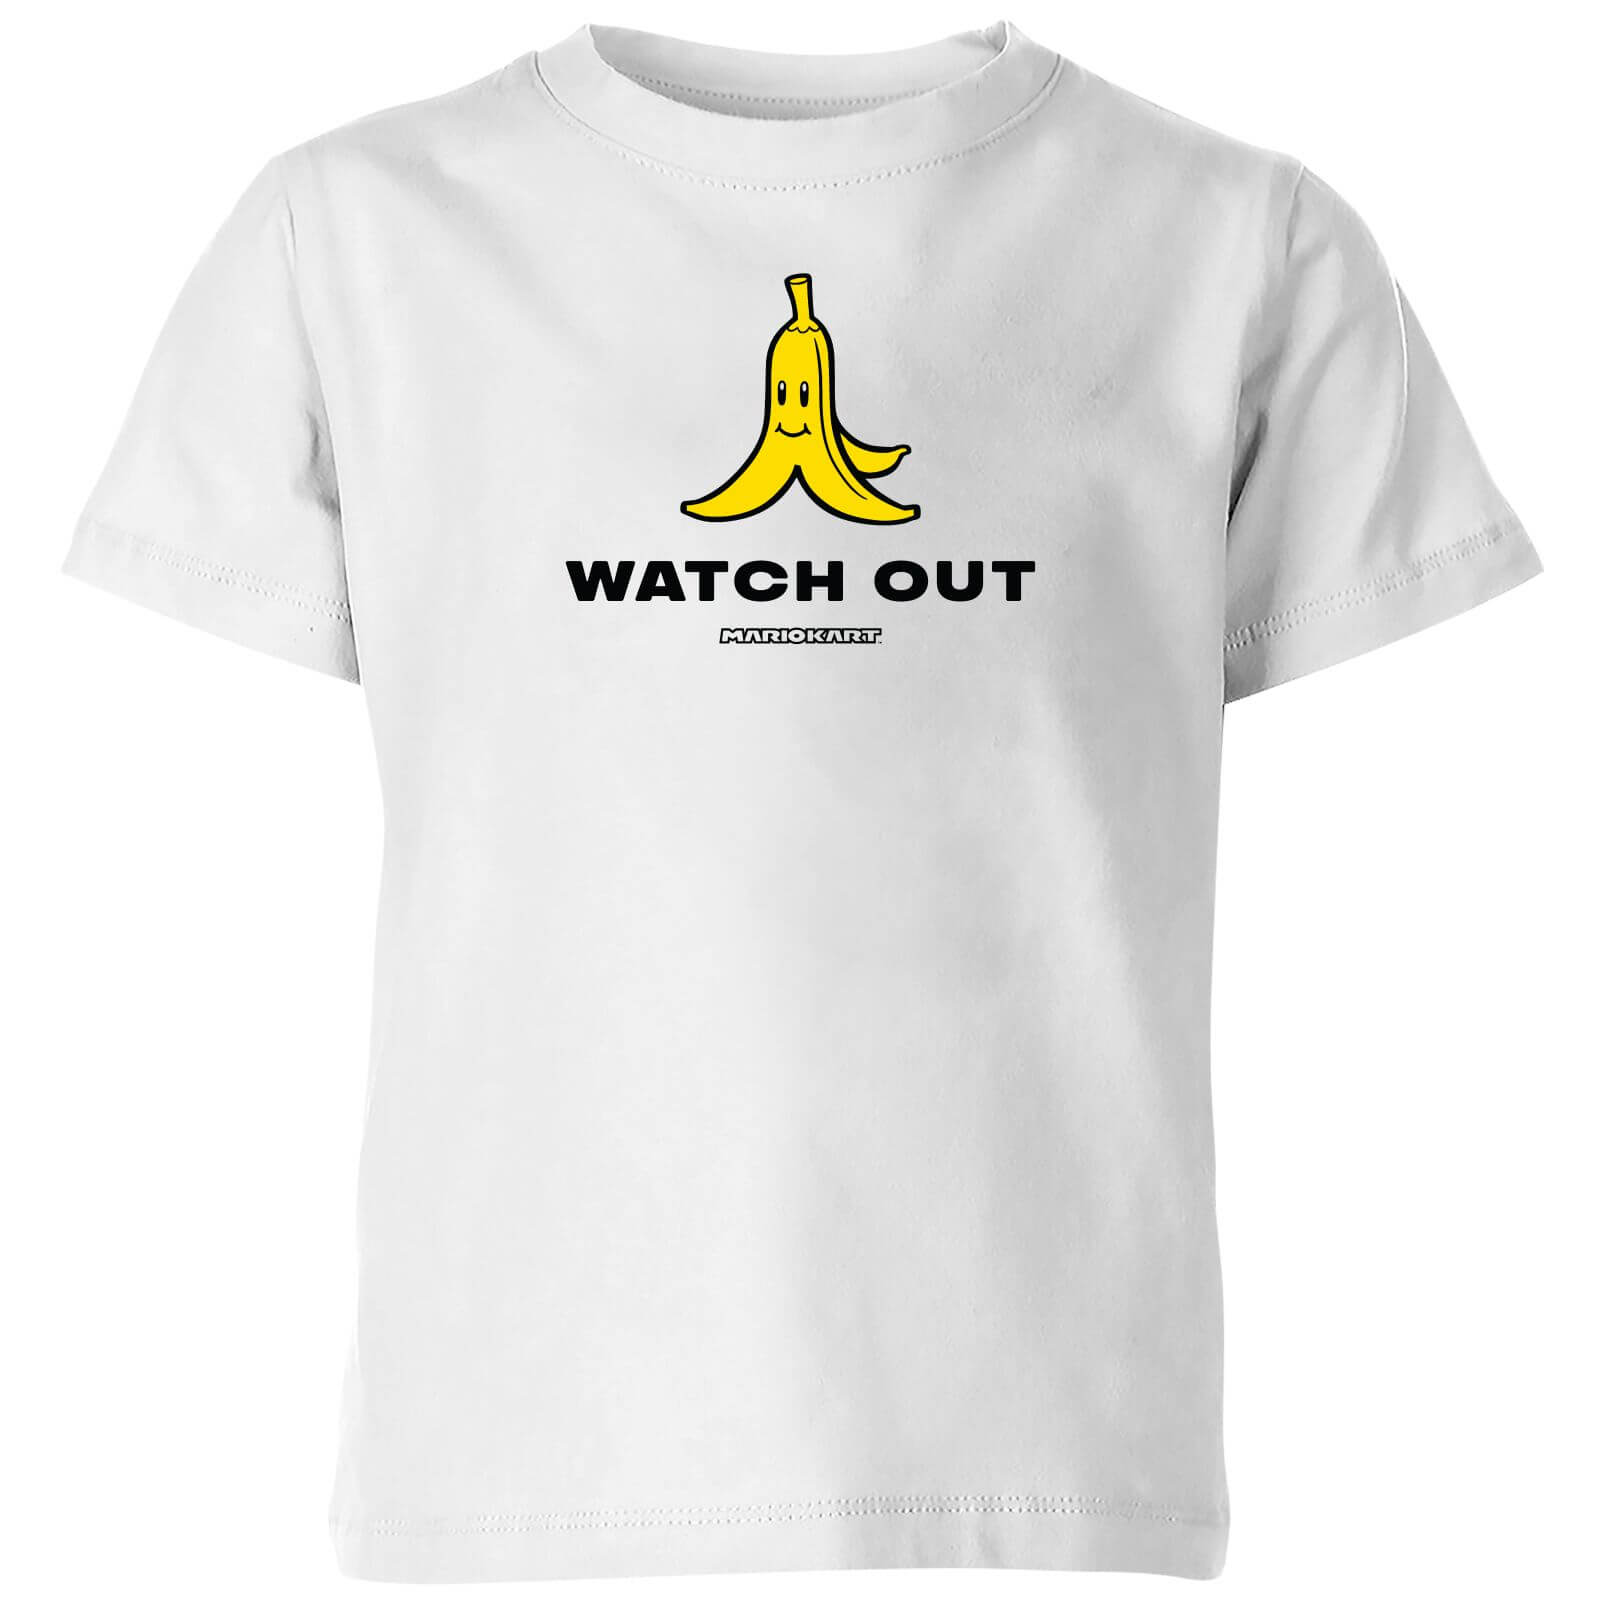 Watch Out Kids' T-Shirt - White - 5-6 Years - White